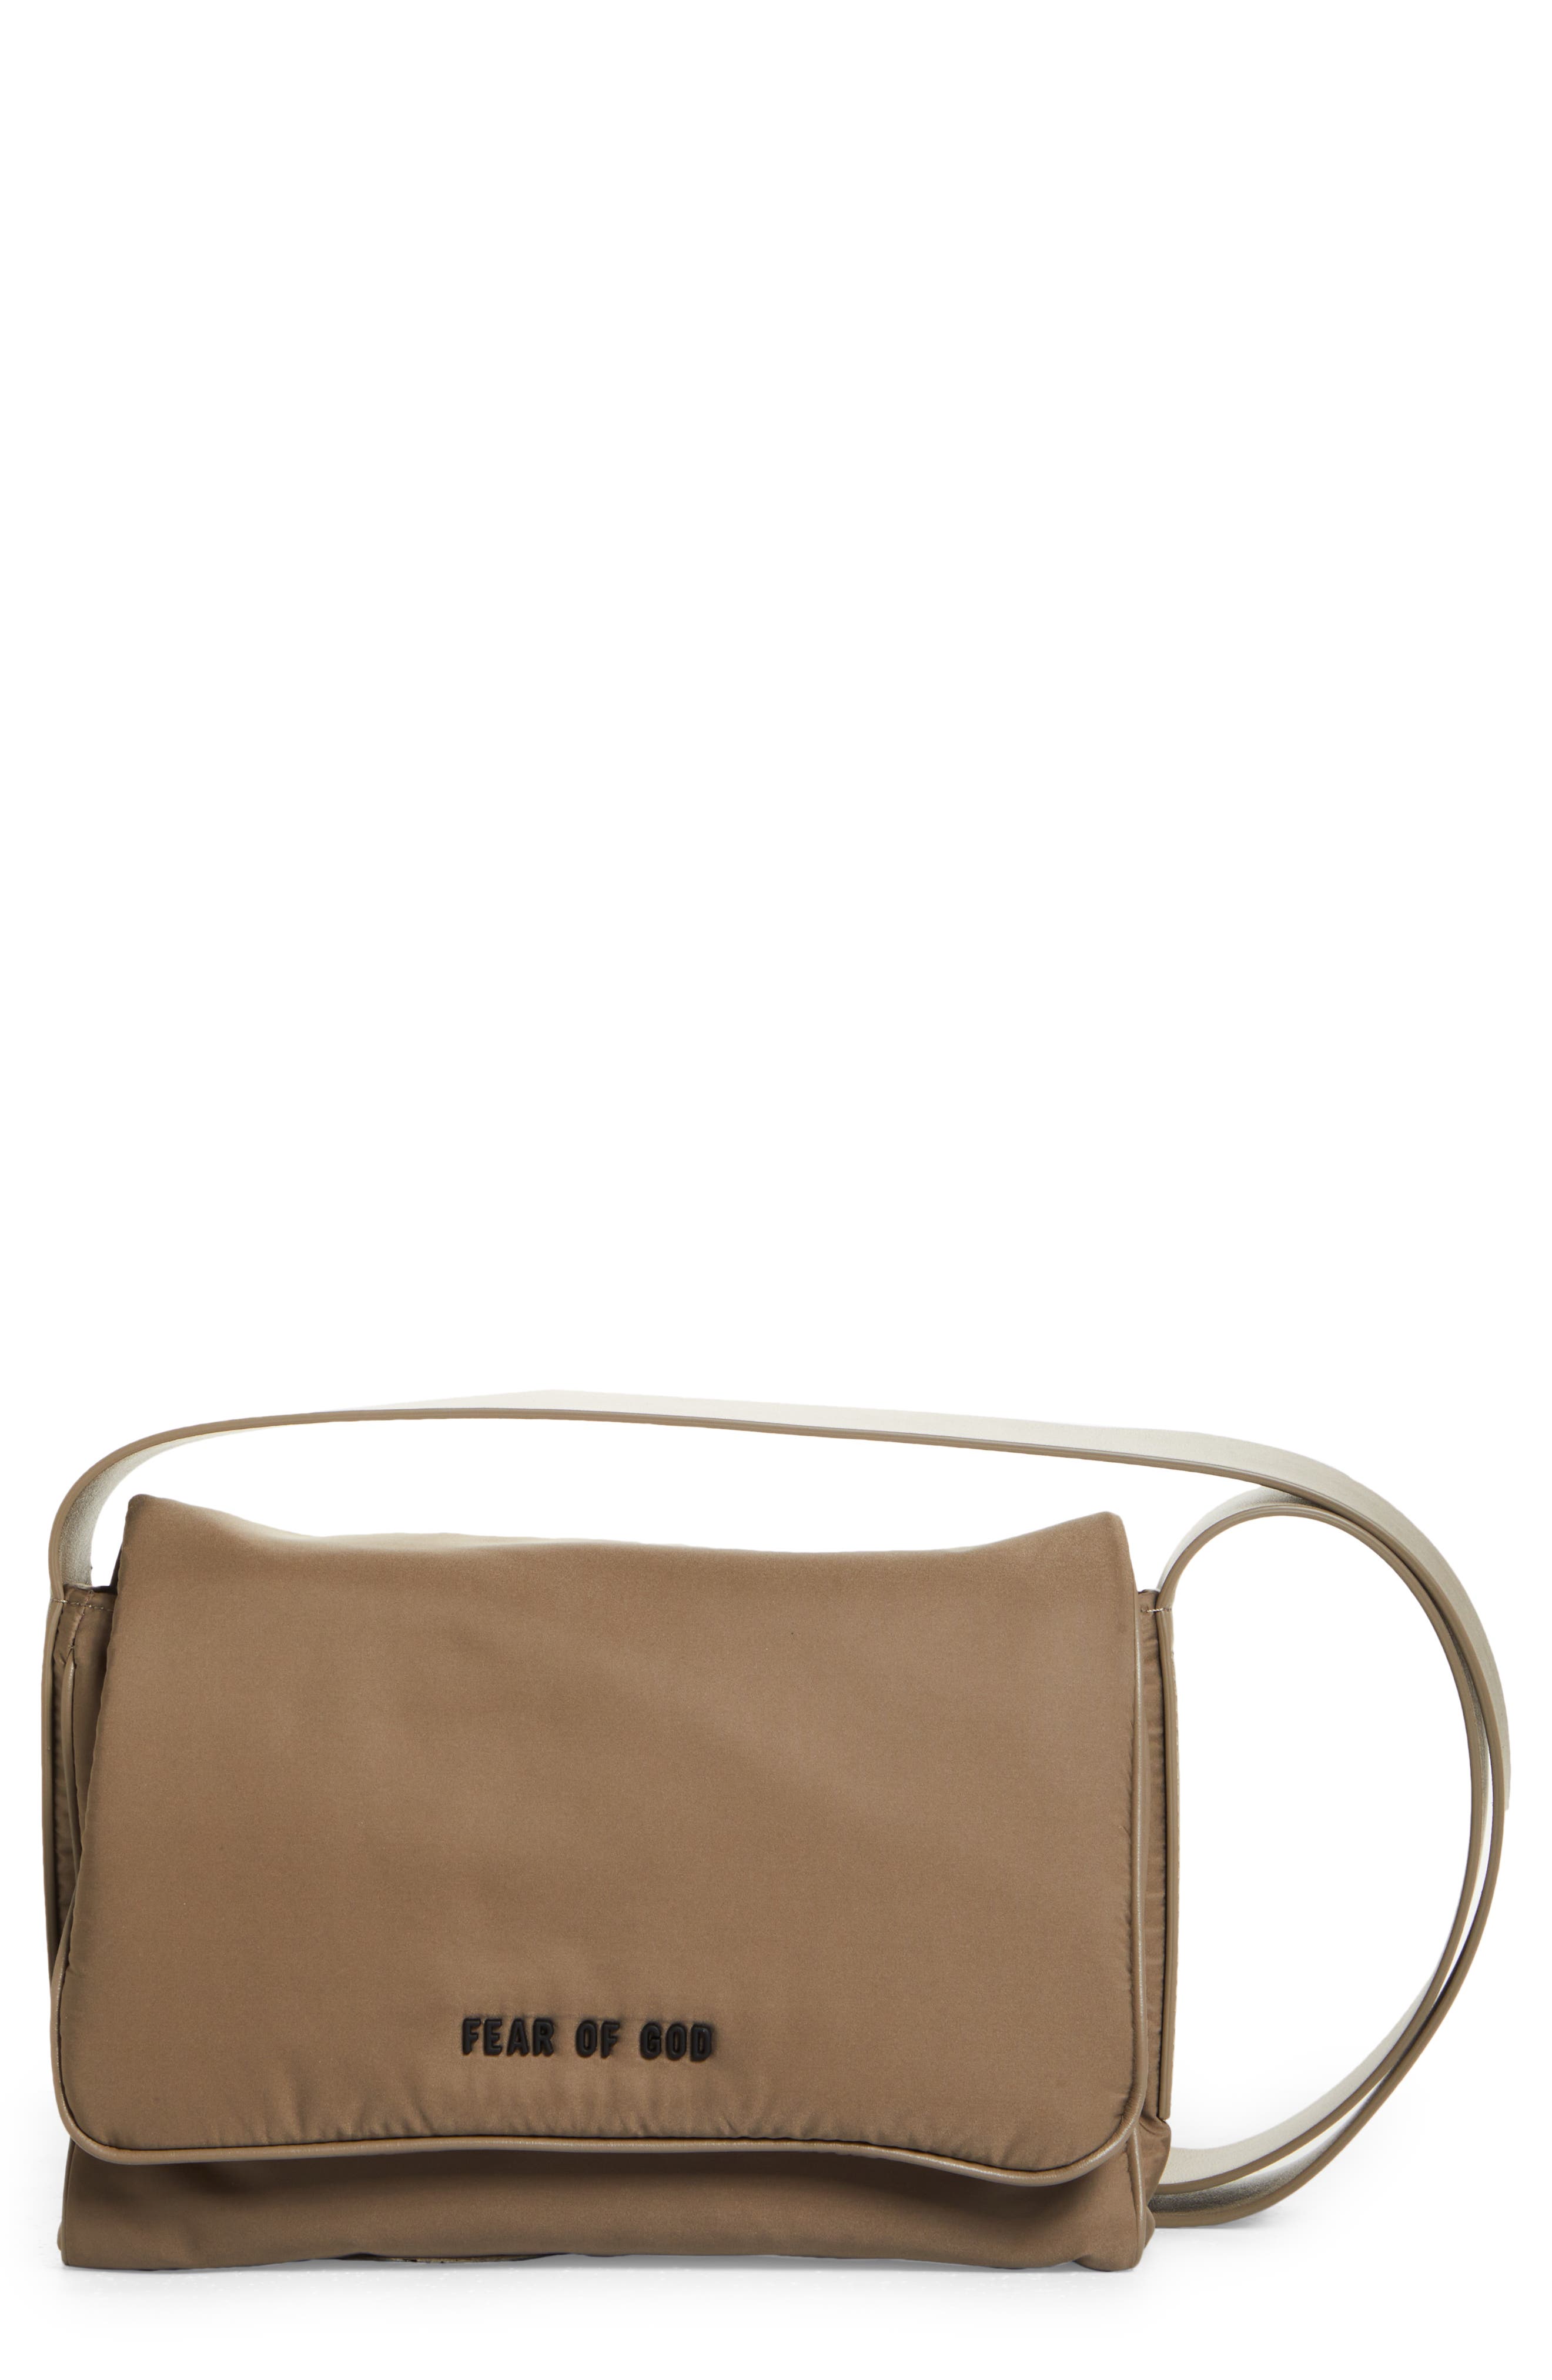 Fear of God Nylon Crossbody Bag in Taupe at Nordstrom